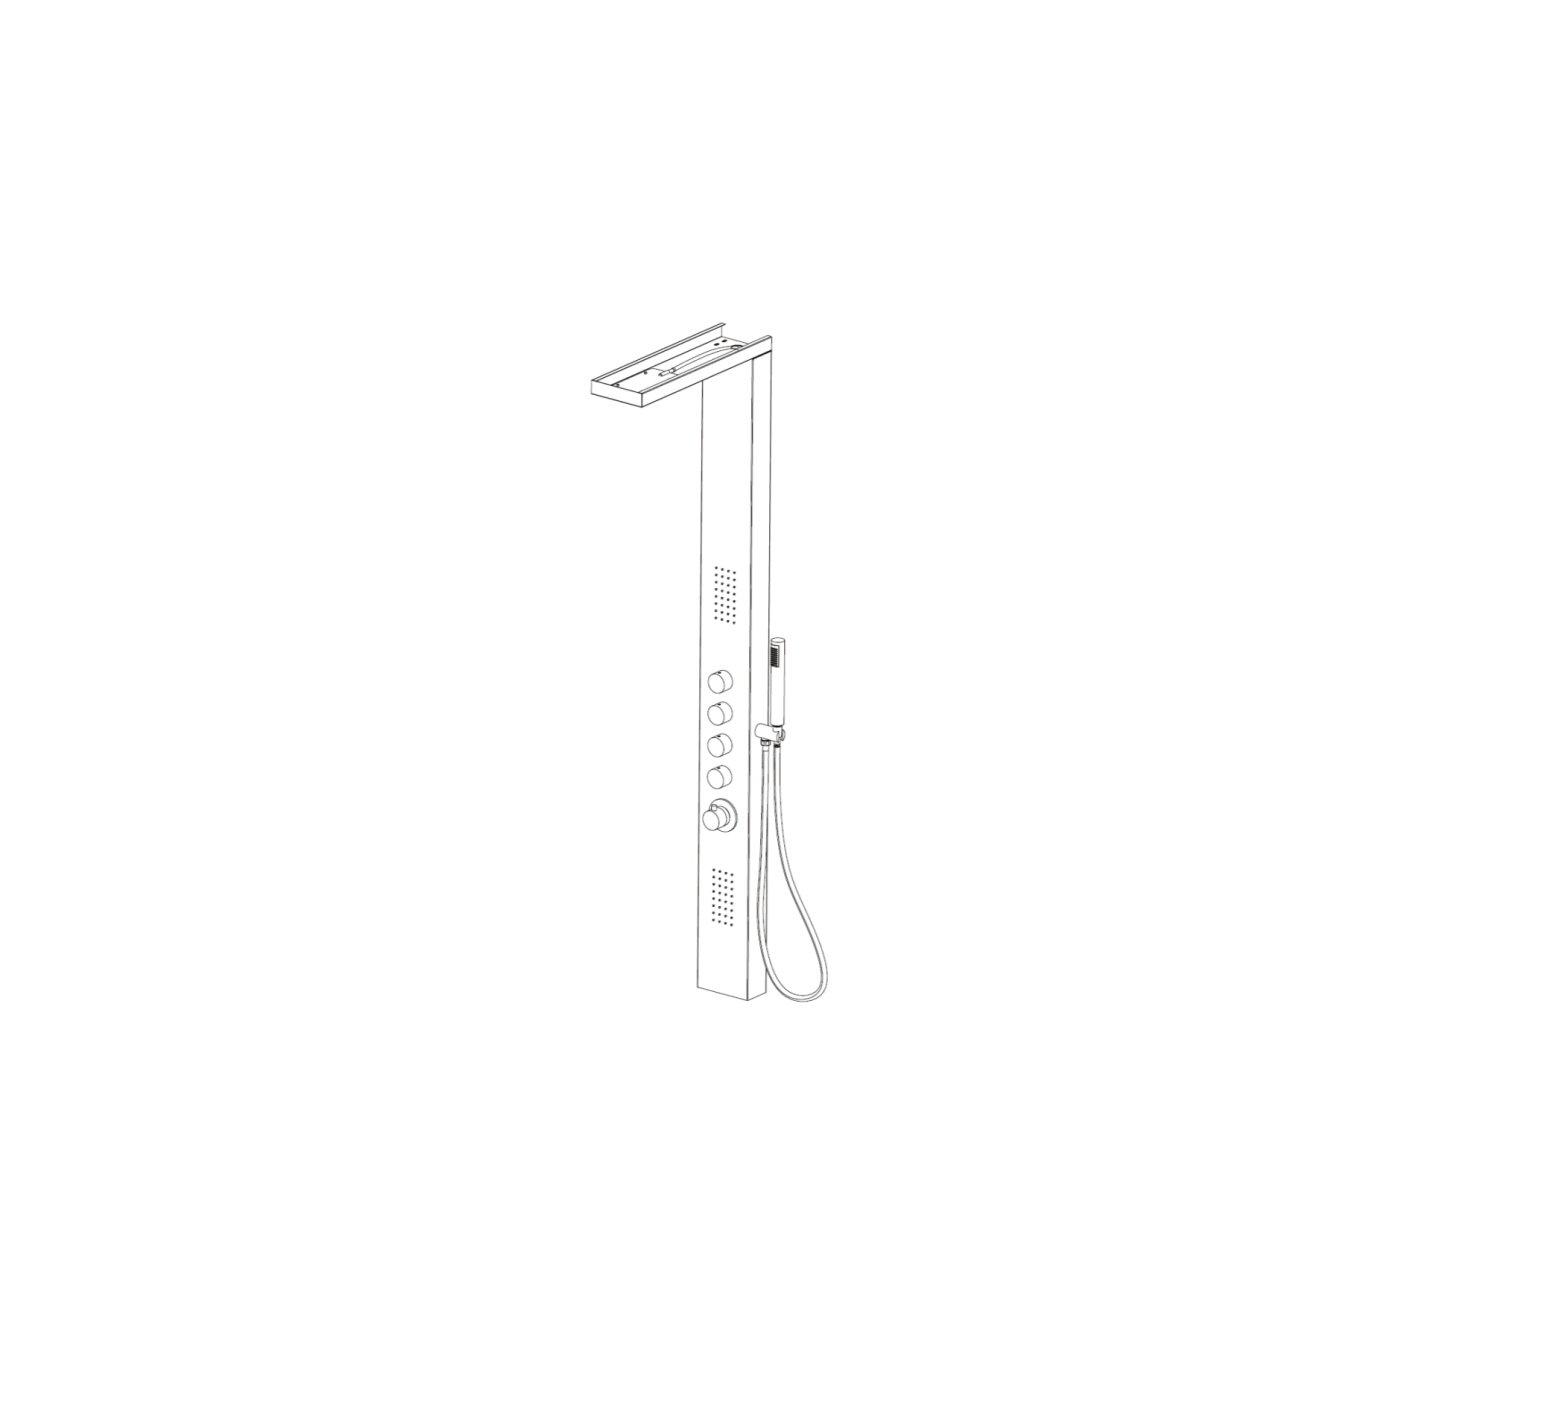 Better Bathrooms BeBa_26850 Provo Thermostatic Shower Tower User Manual